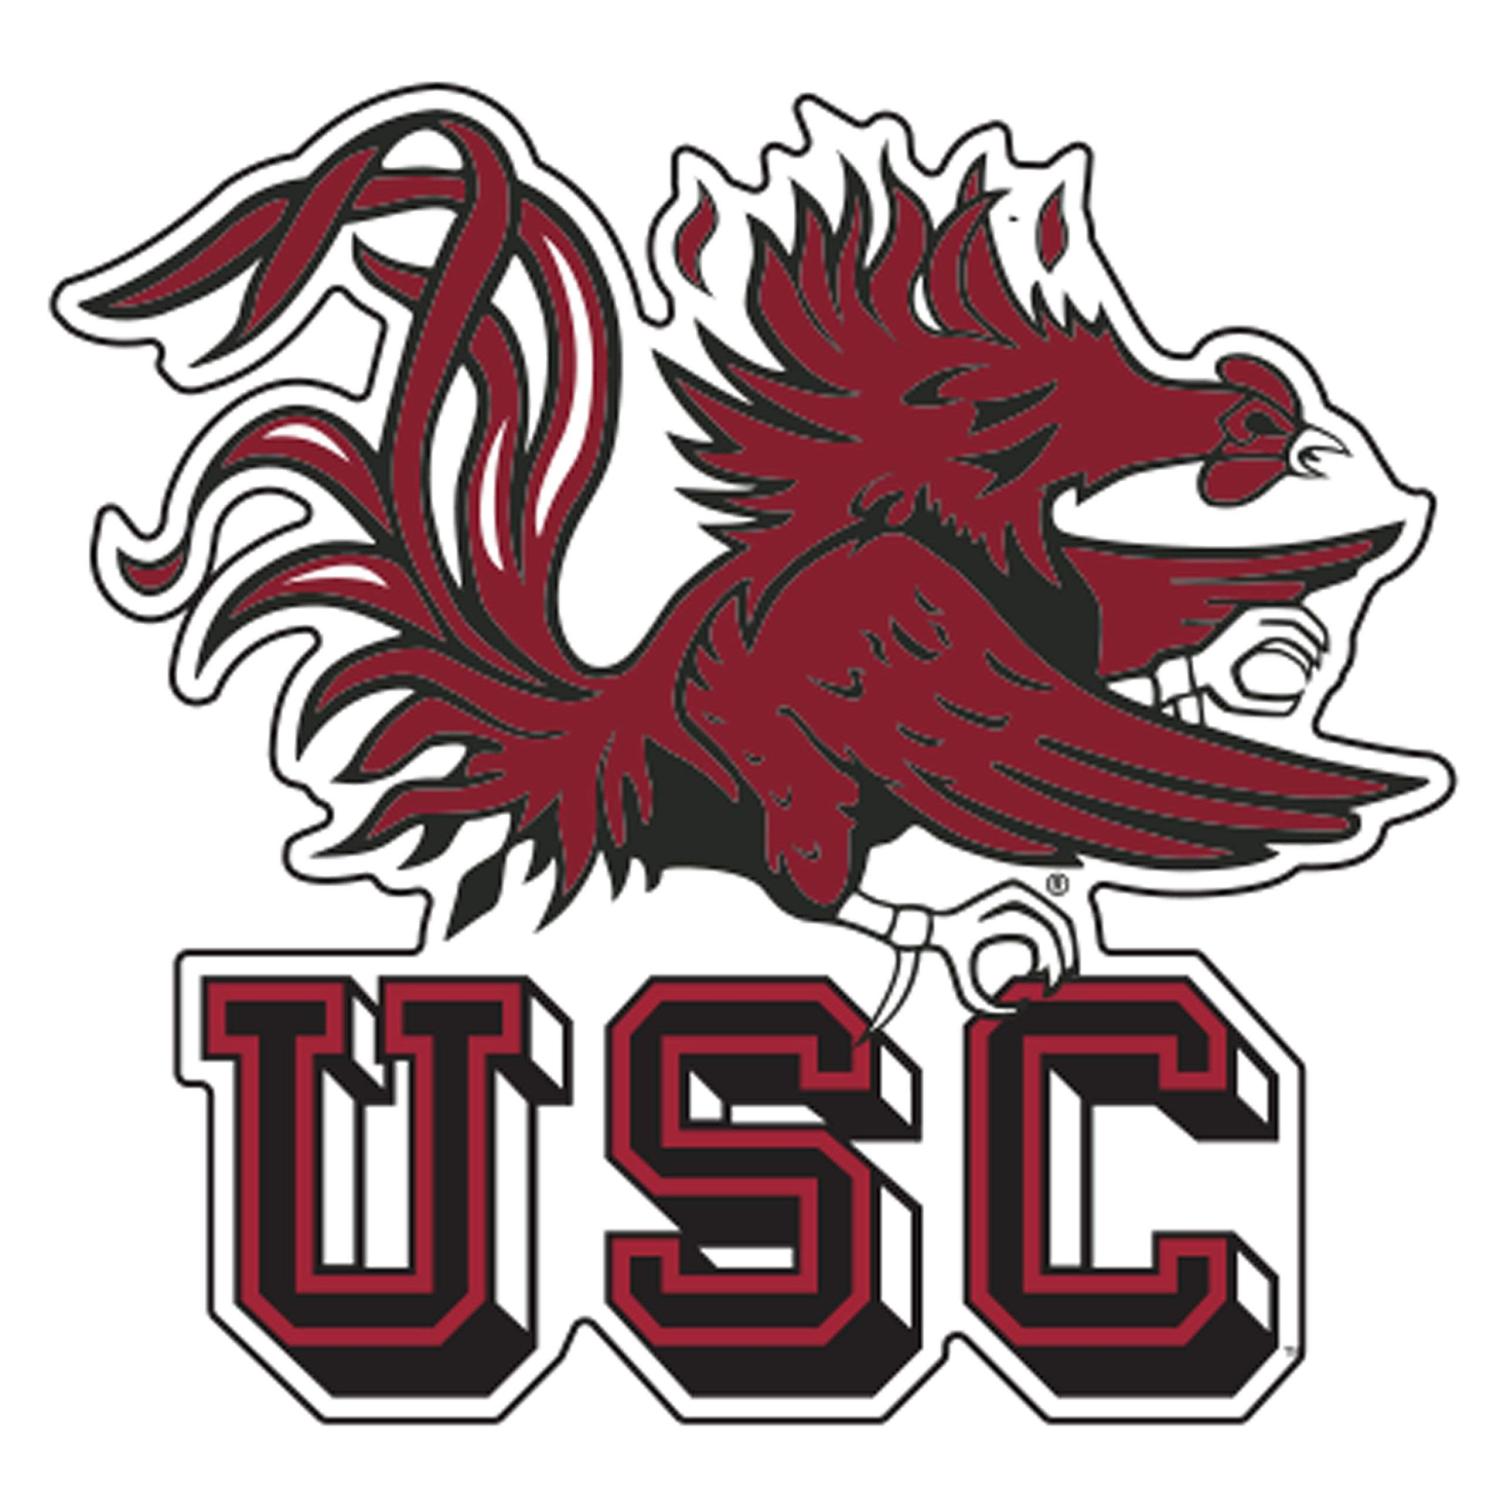 Craftique South Carolina Decal (Gamecock USC Decal (4''), 4 in)